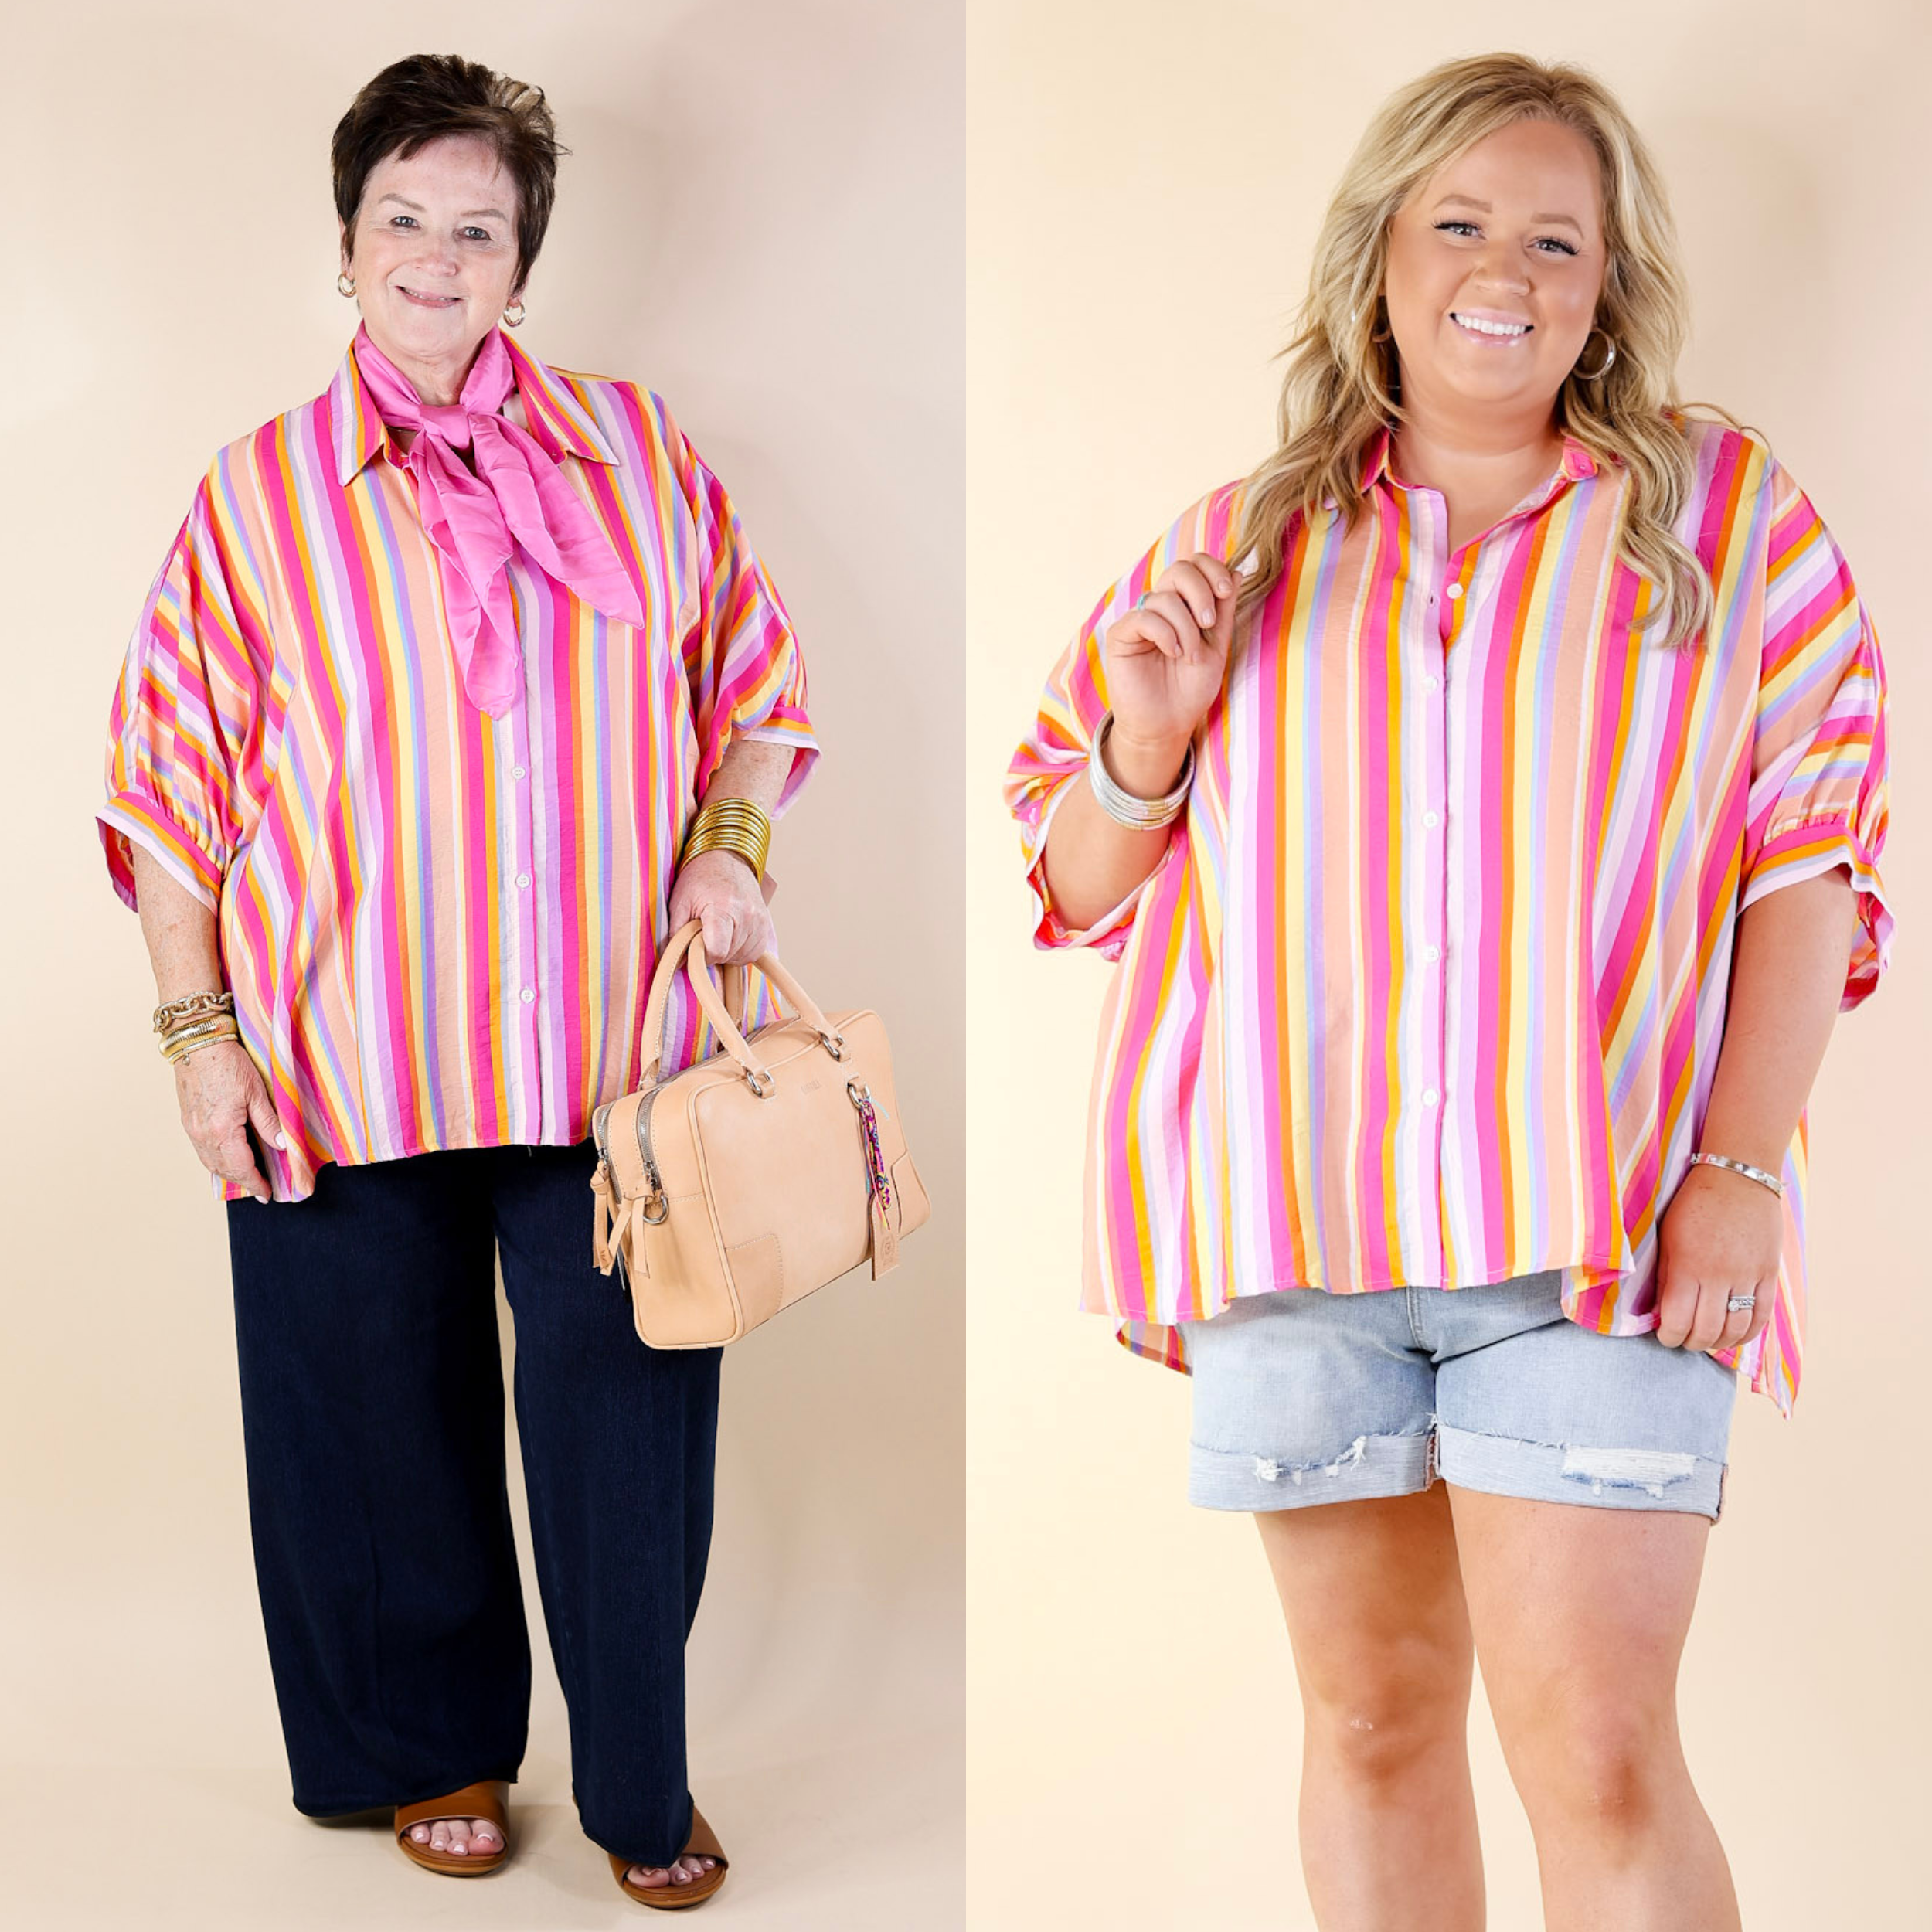 Bold Bliss Multi Color Striped Top with Collar - Giddy Up Glamour Boutique